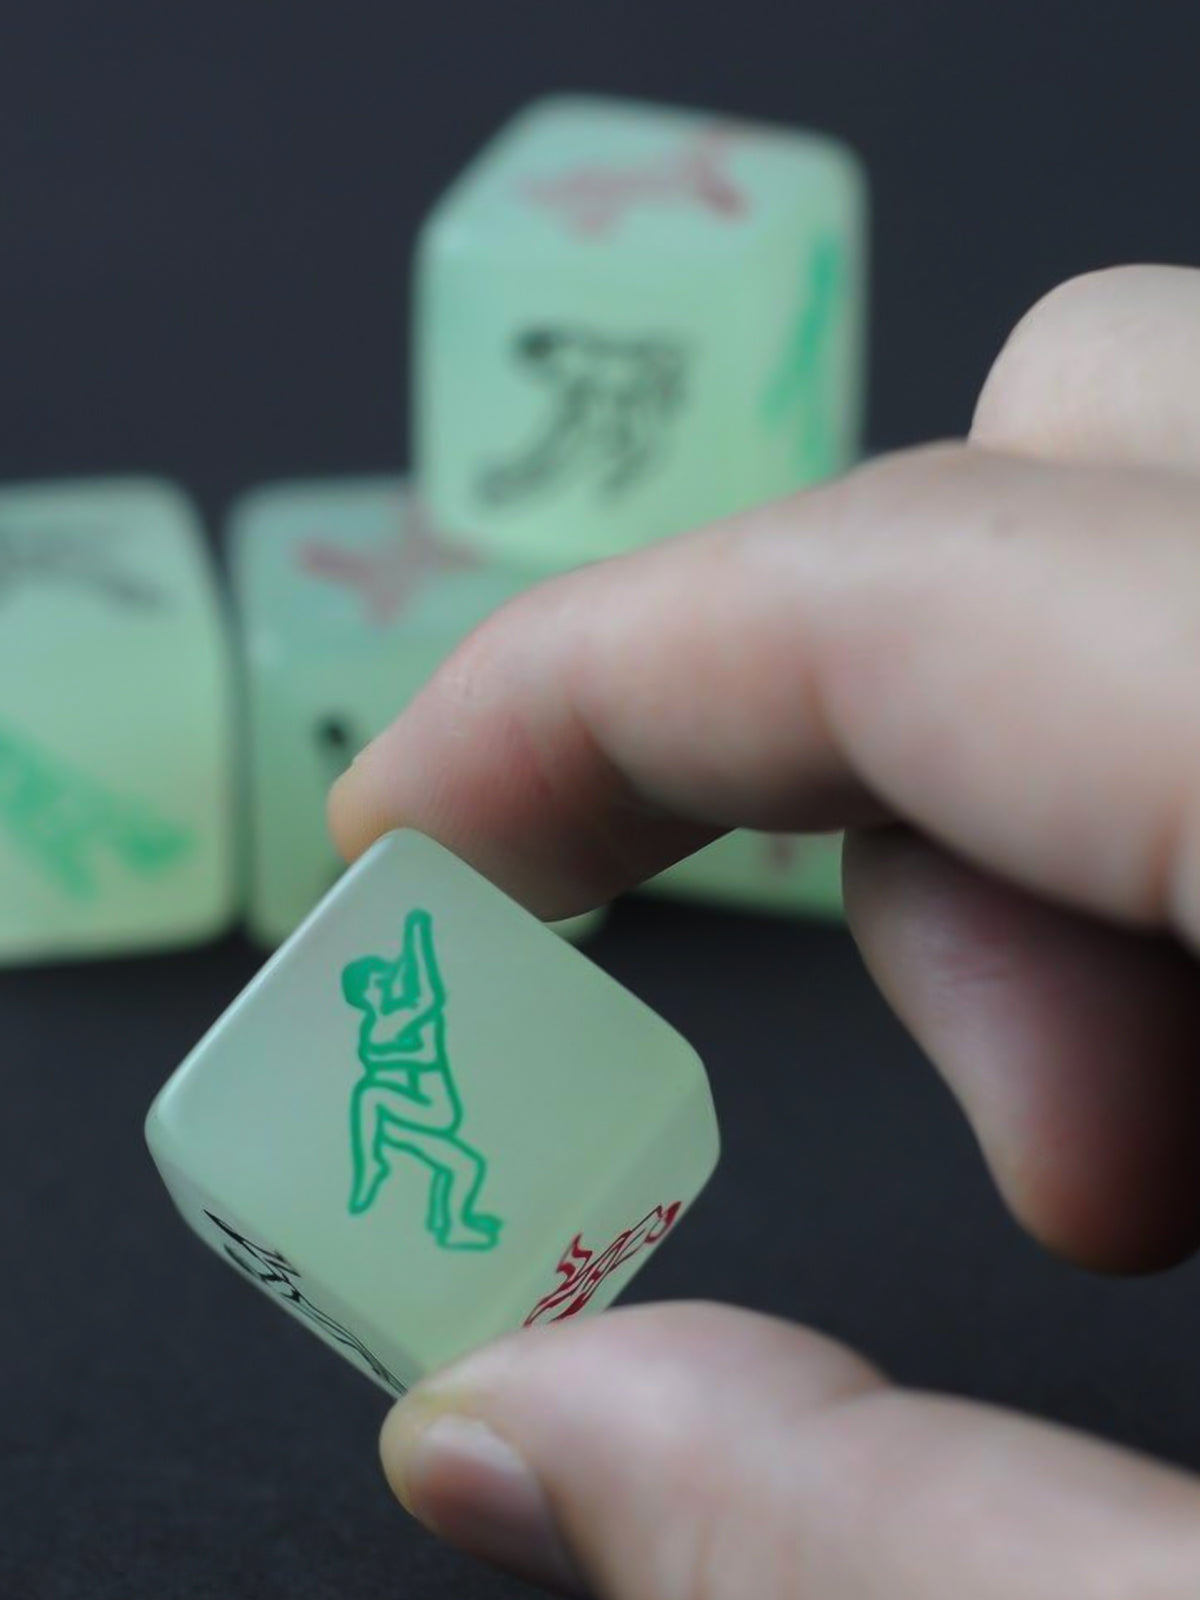 Glow in the Dark Dice - Positions